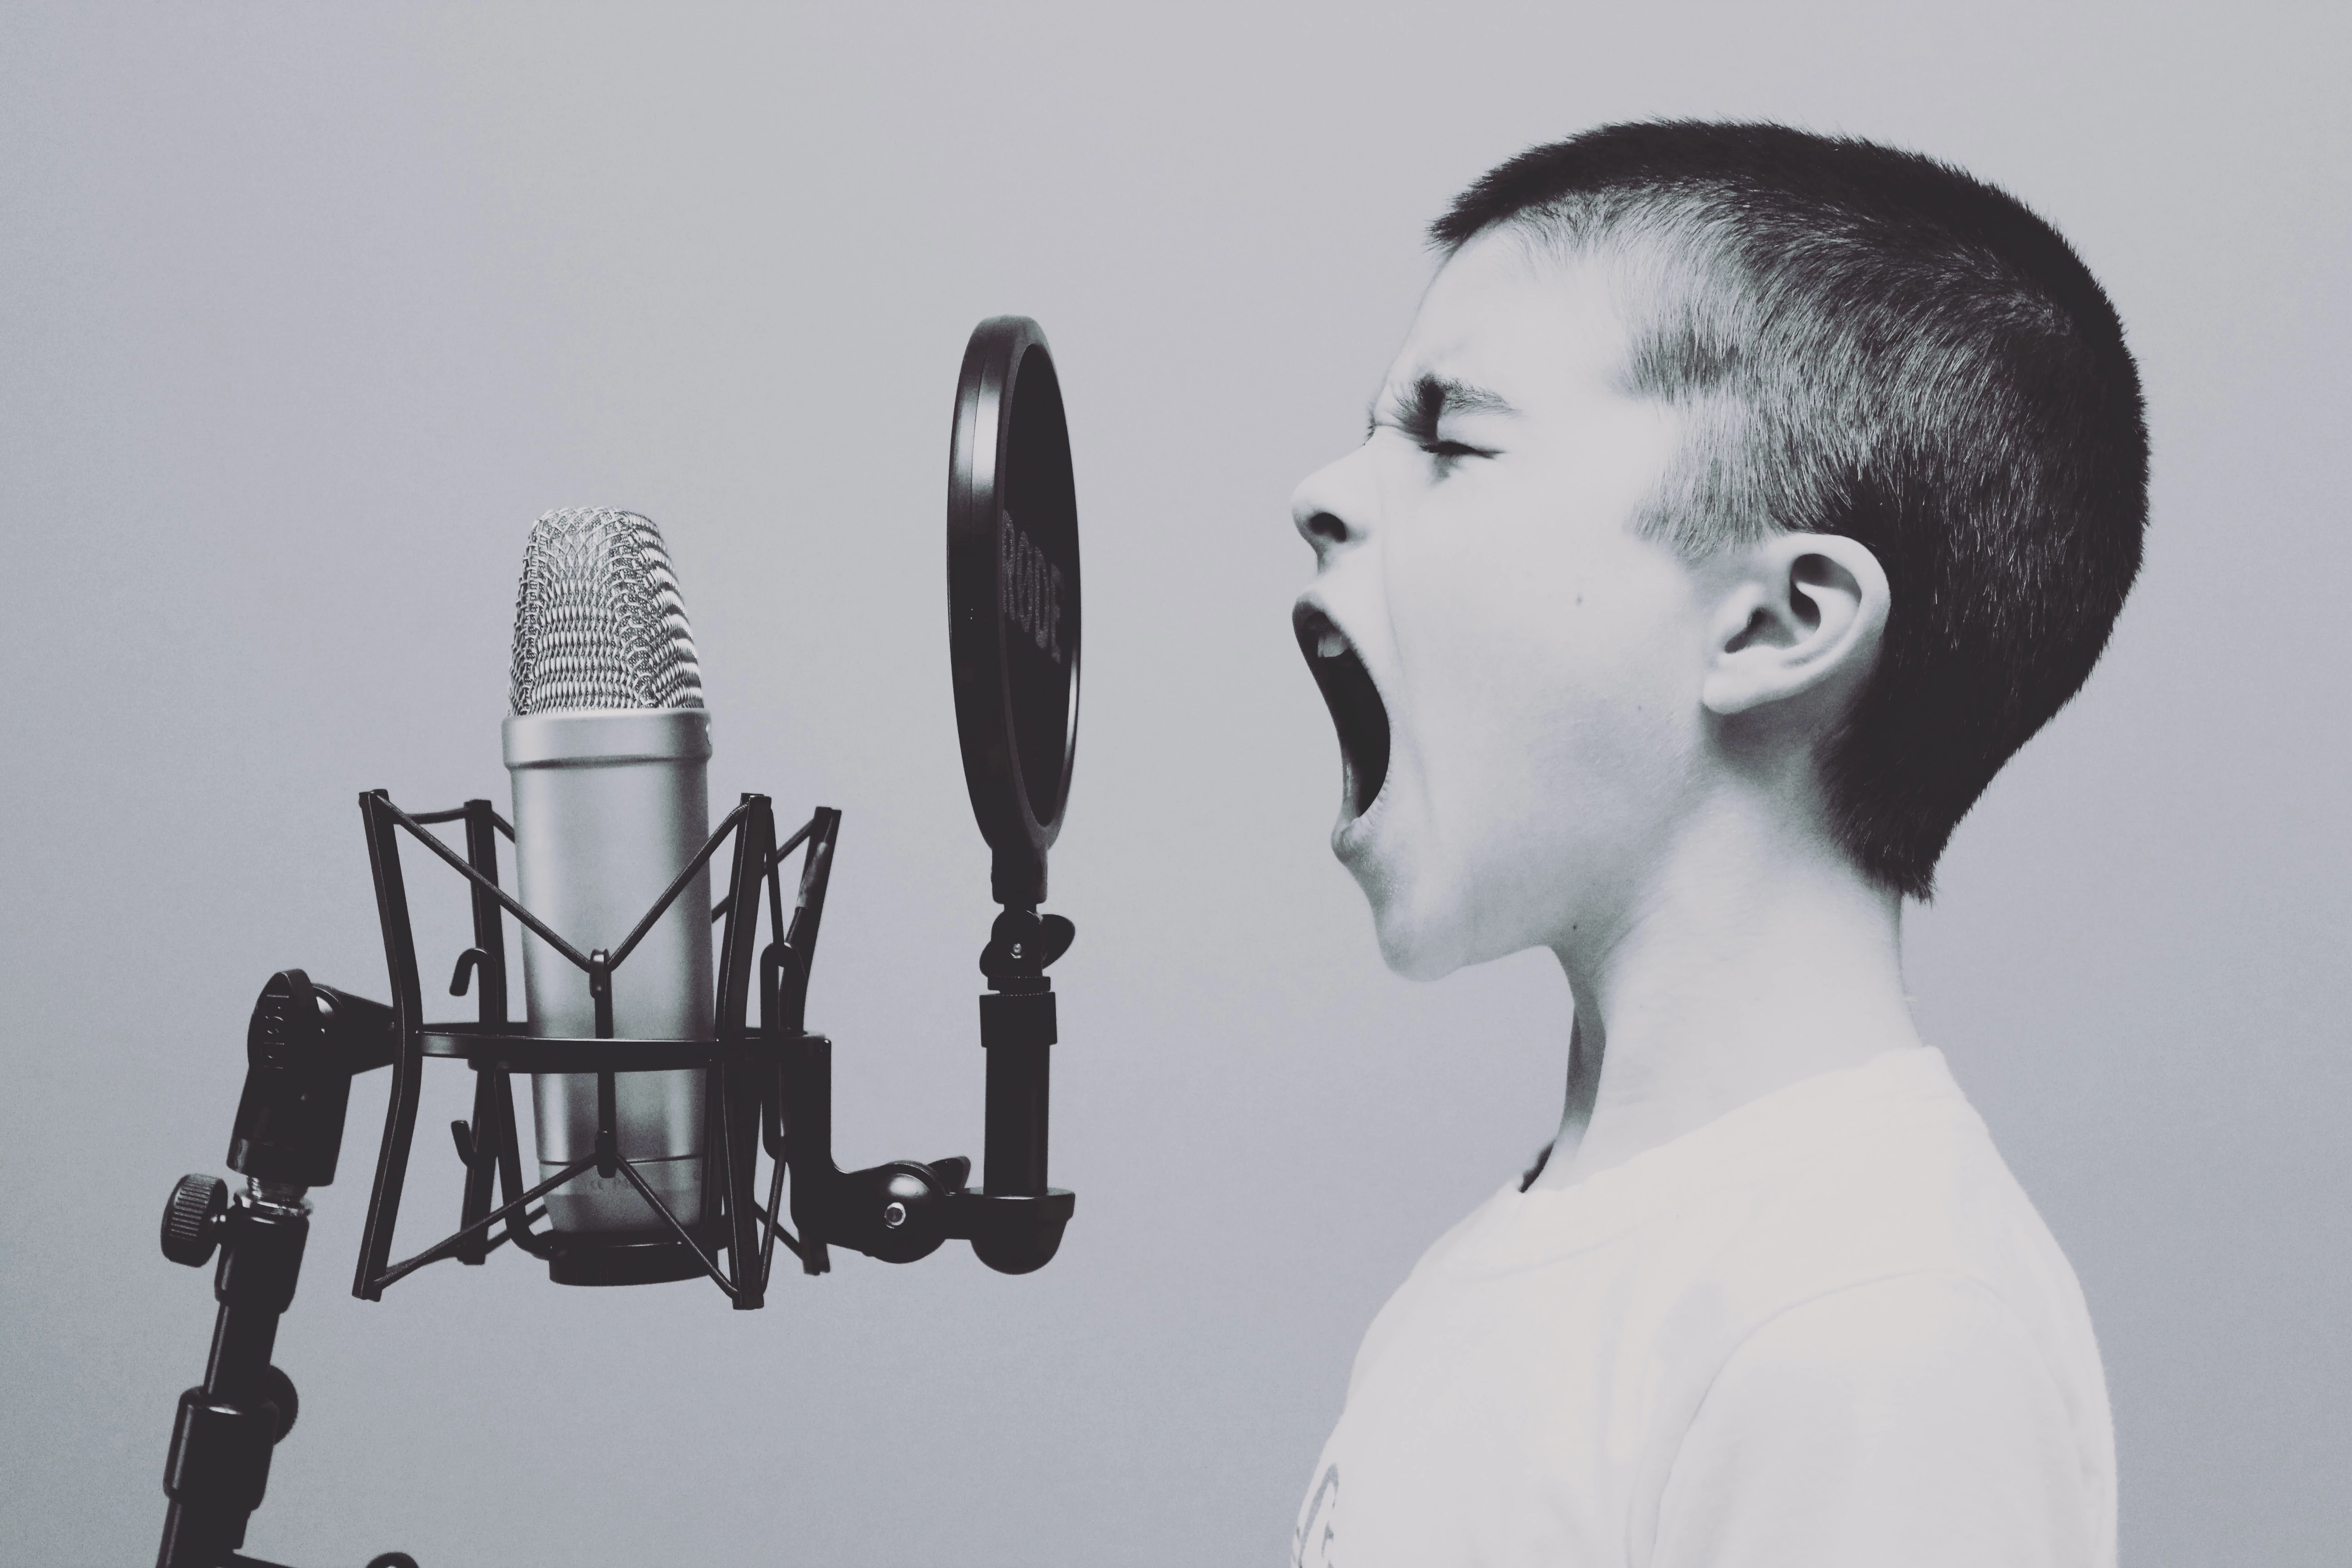 child shout on microphone